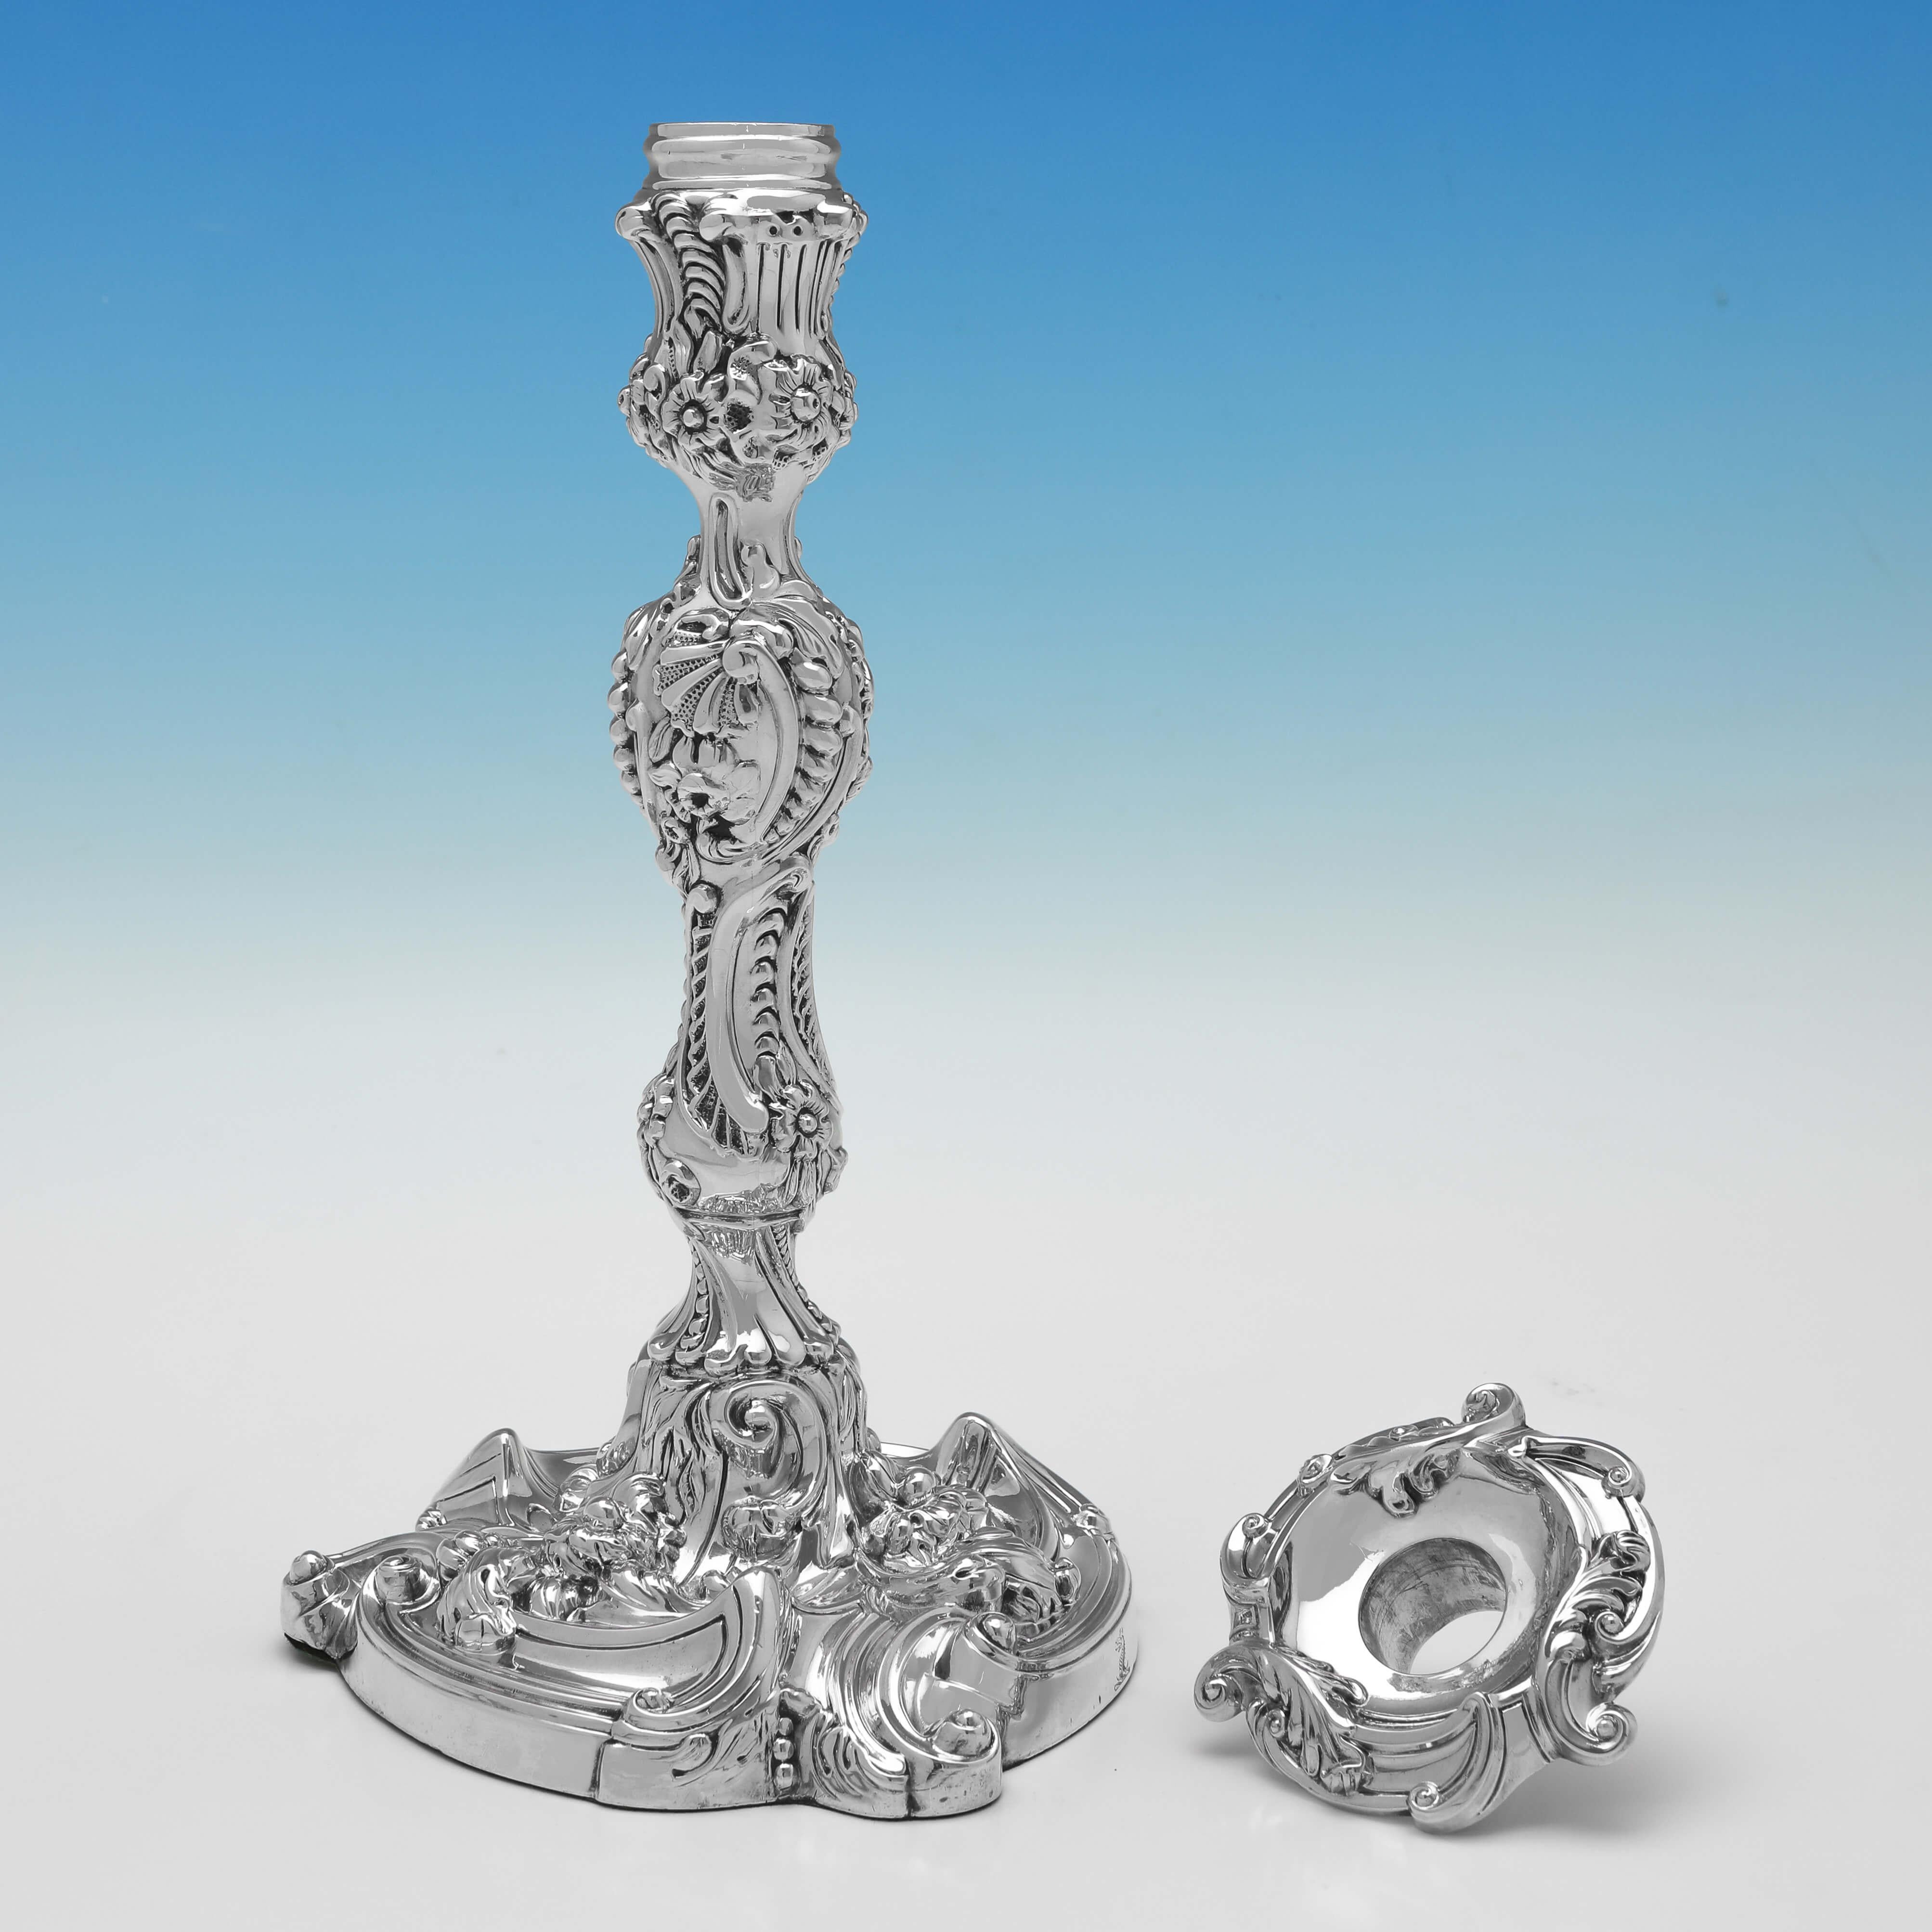 English Regency Period Ornate Pair of Sterling Silver Candlesticks - Sheffield 1816 For Sale